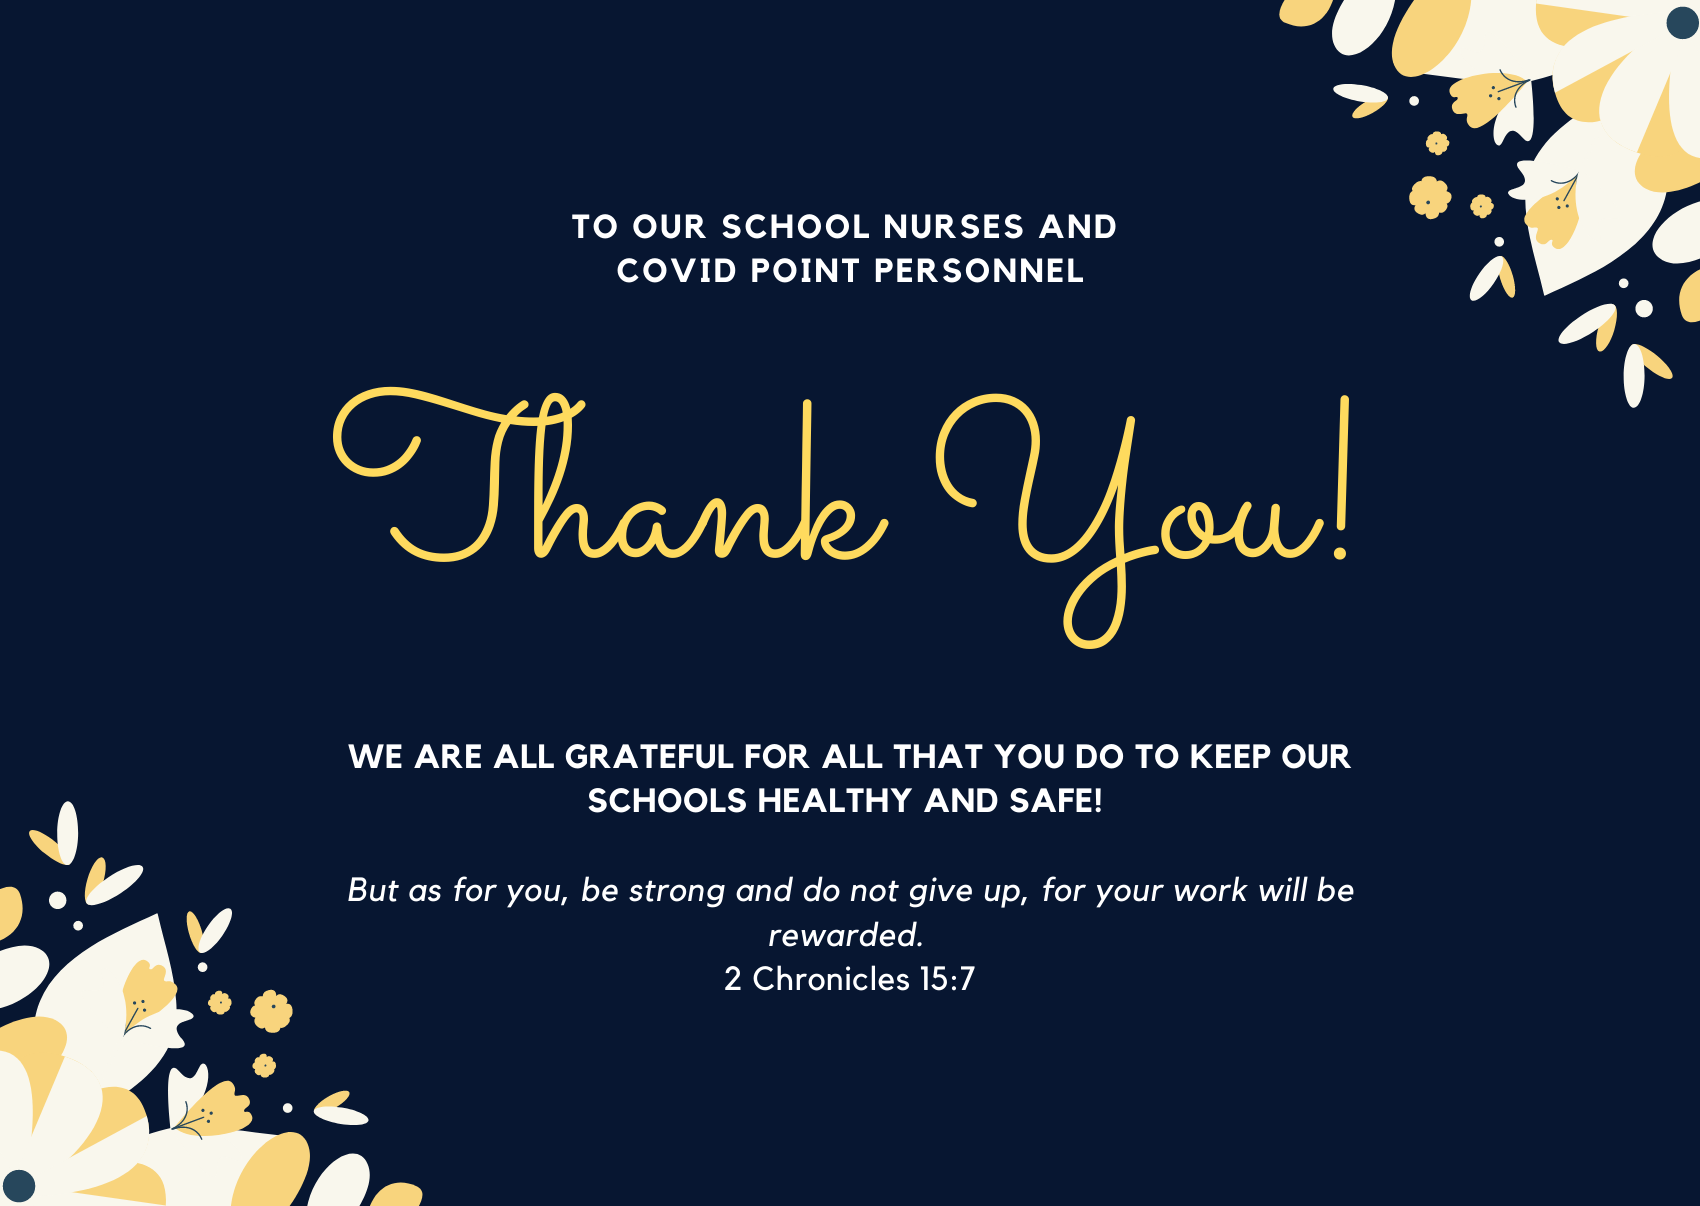 Christian Academy School System | To Our Nurses and COVID Point Personnel | Thank You